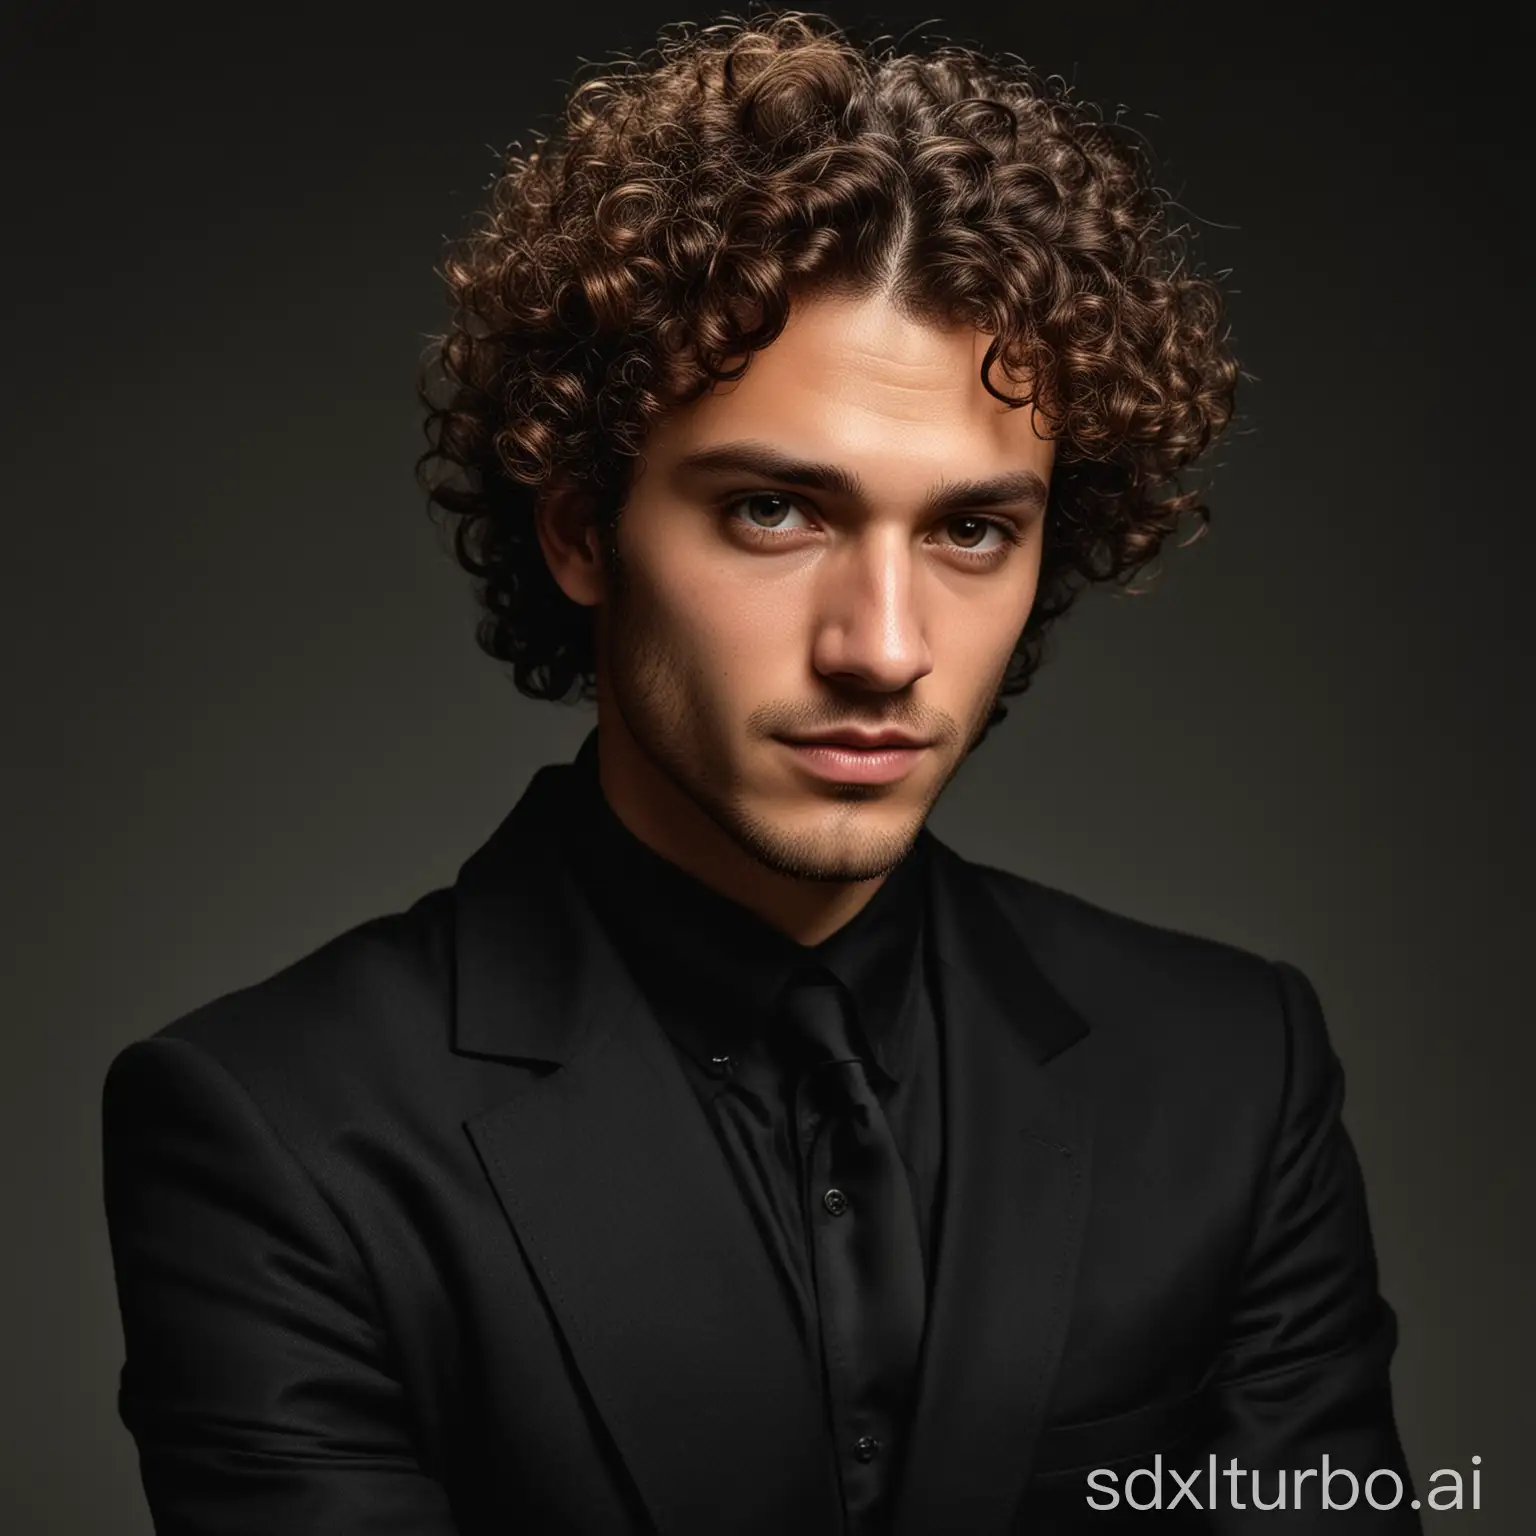 Serious-CurlyHaired-Man-Portrait-in-Black-Suit-Jacket